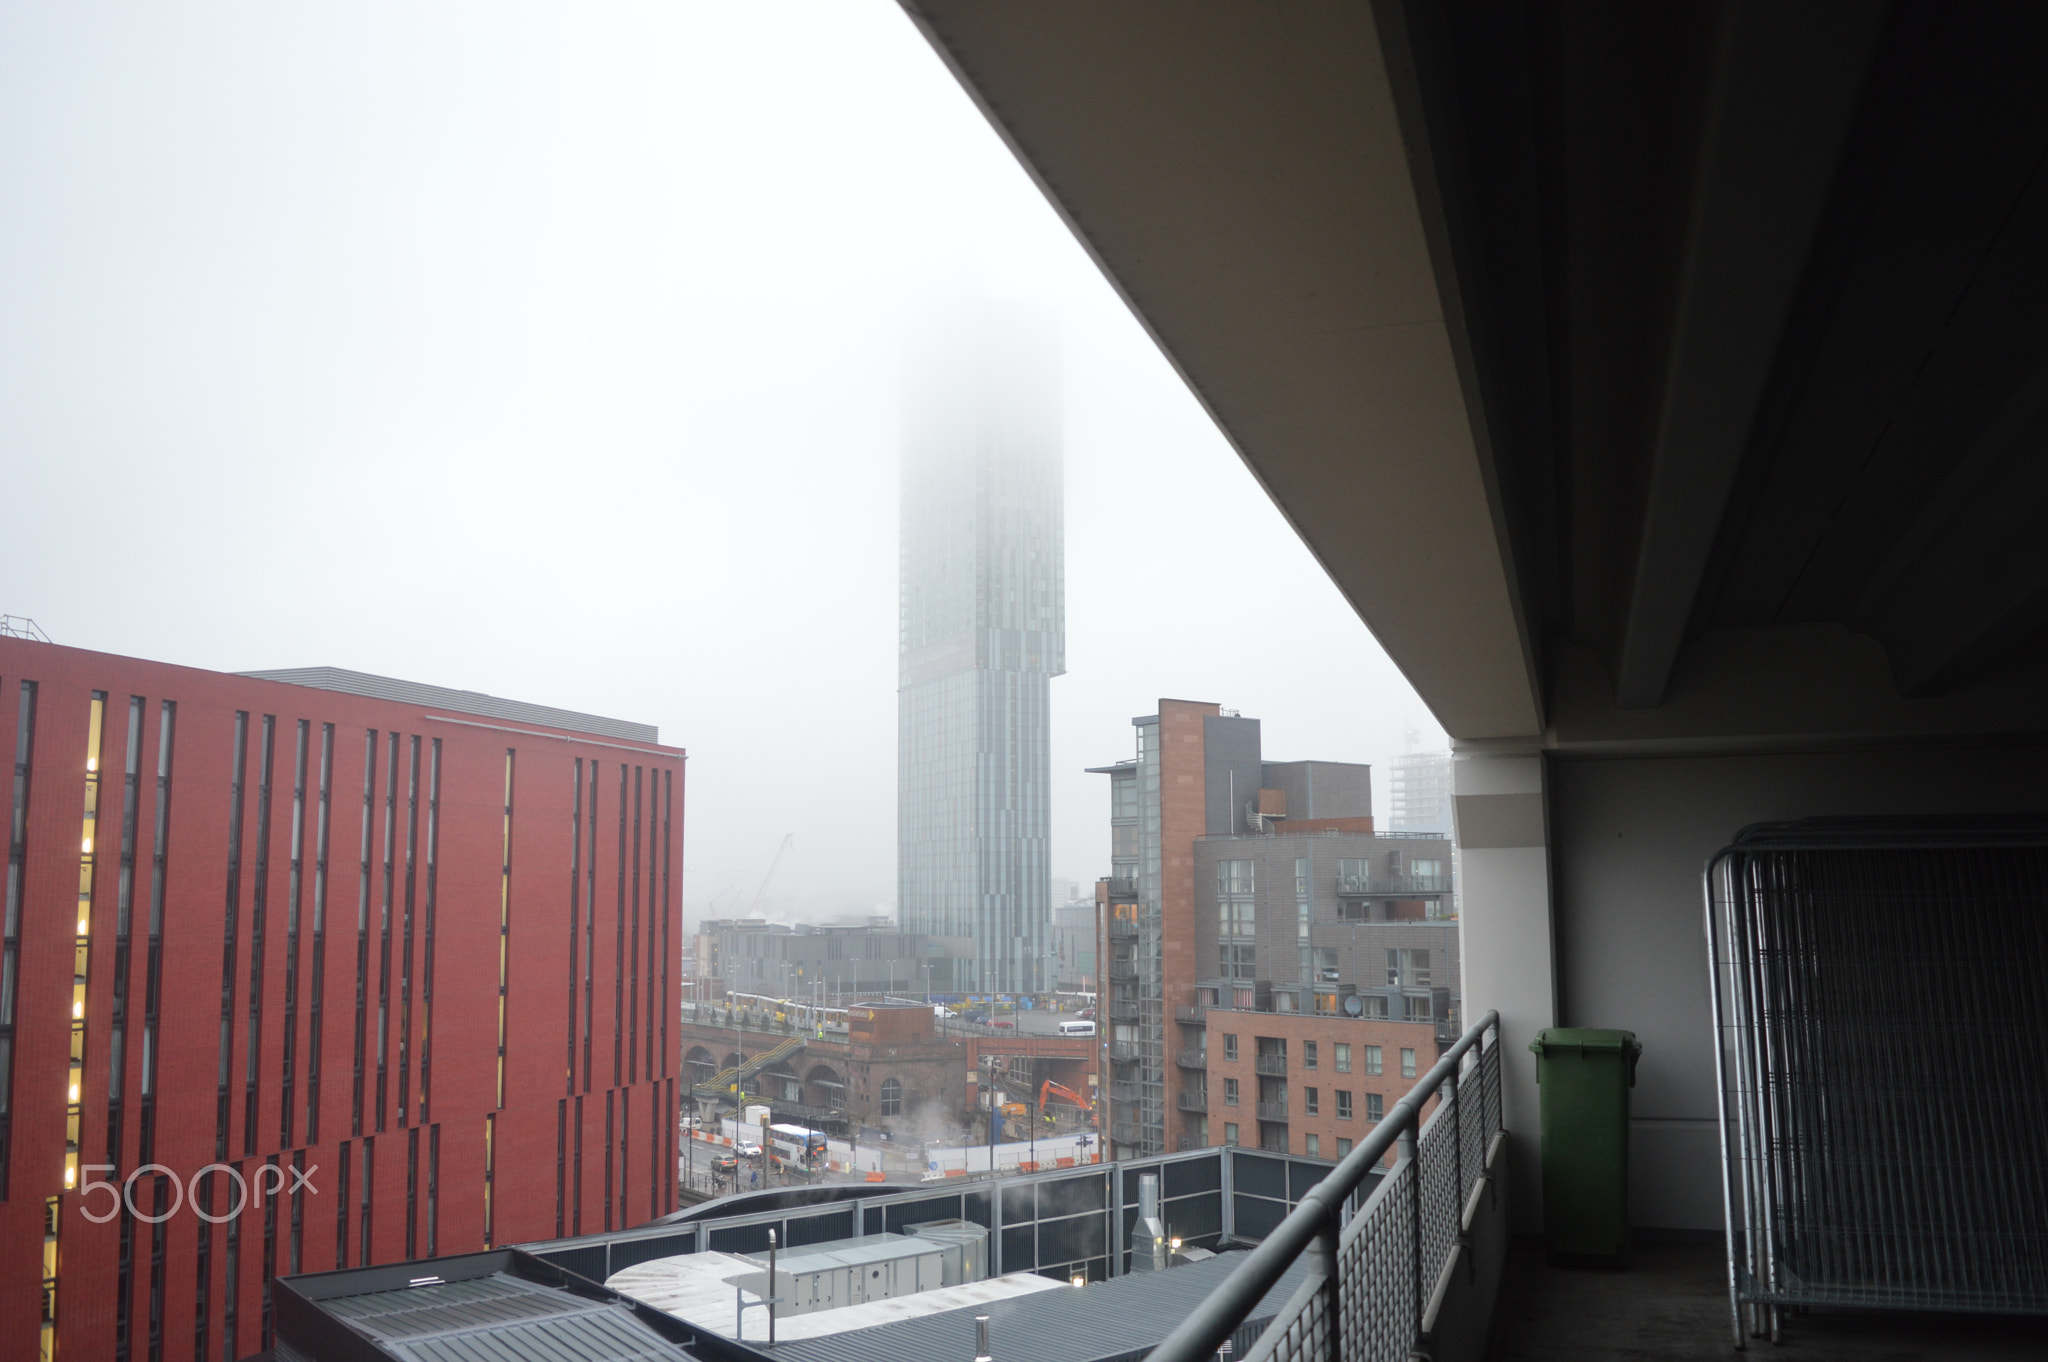 Manchester Beetham Tower